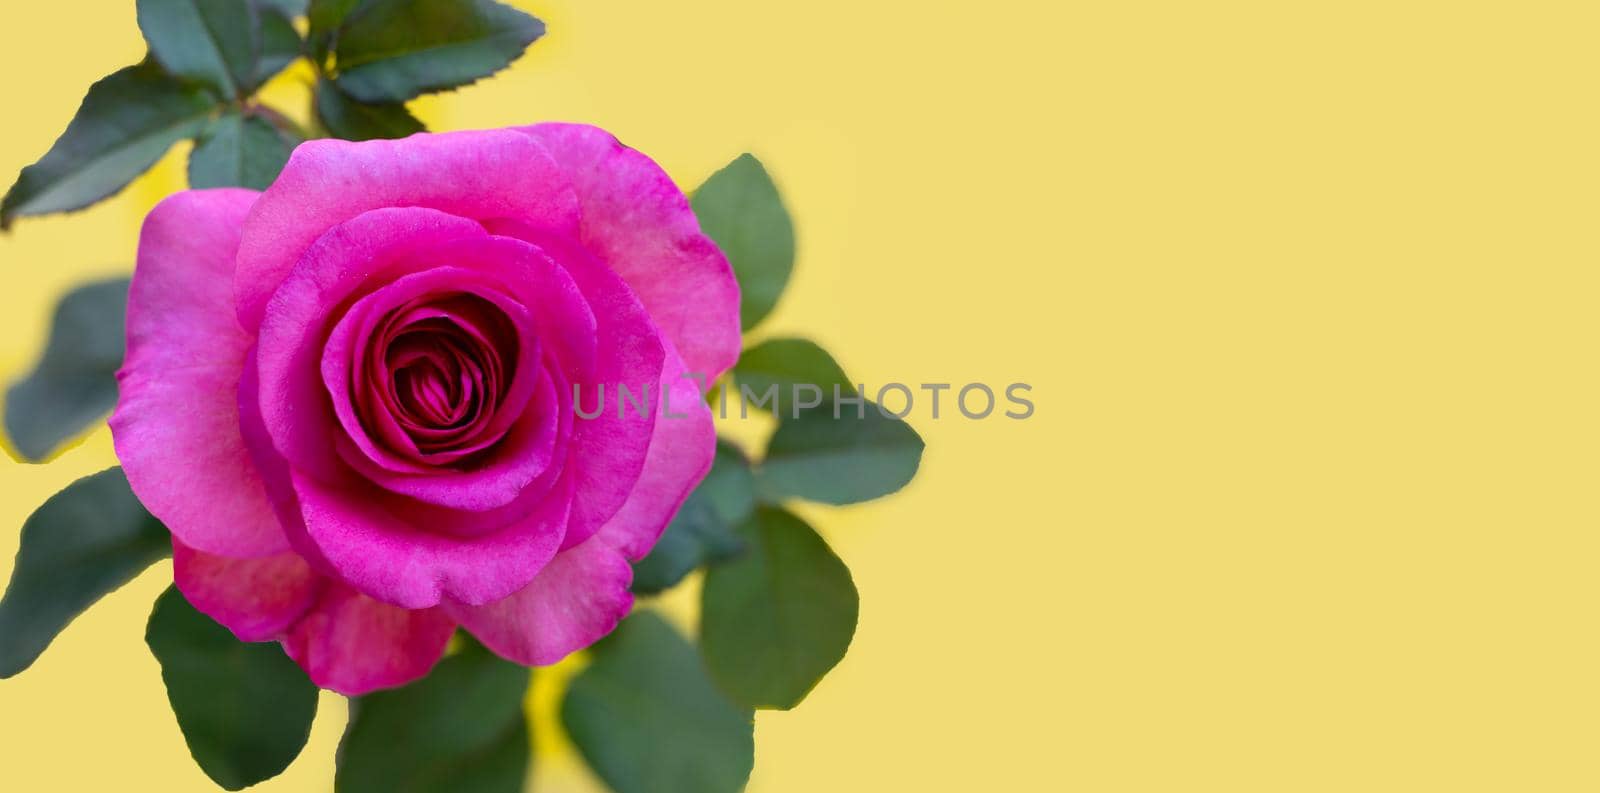 Rose on yellow background. Valentine's day concept.